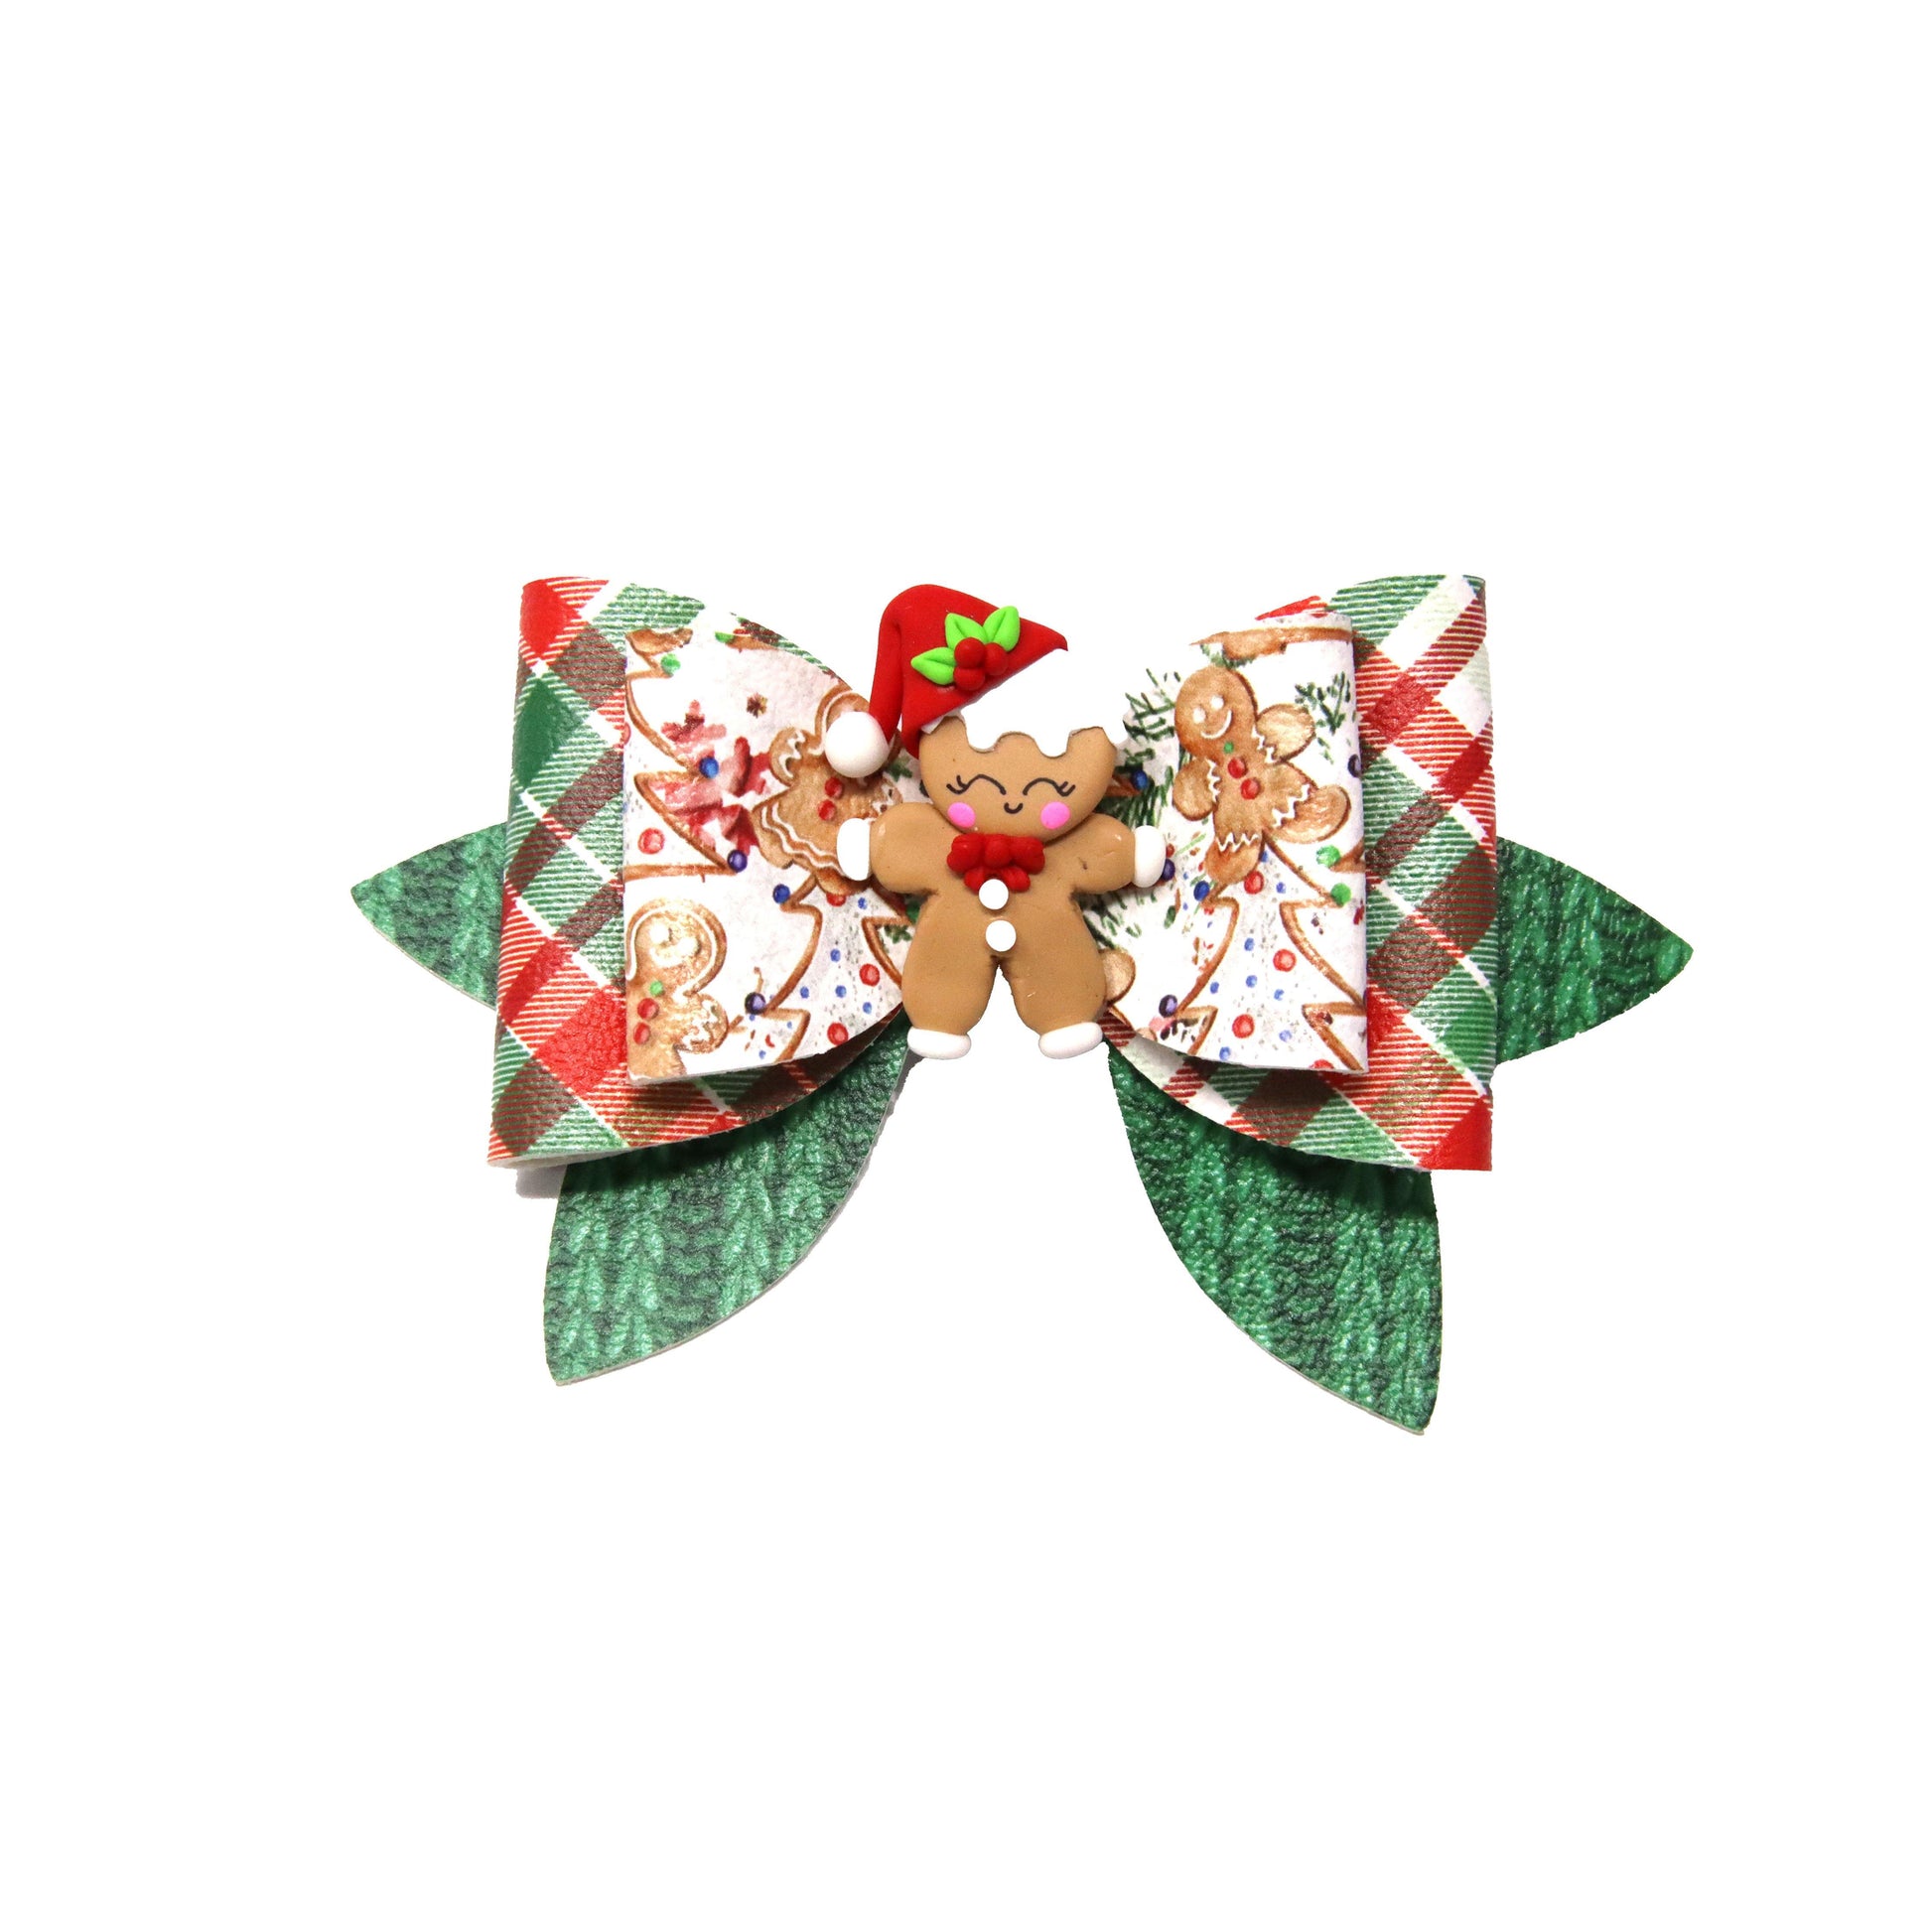 4.5 inch Gingerbread Man Plaid Double Harlow Bow with Gingerbread Man Clay